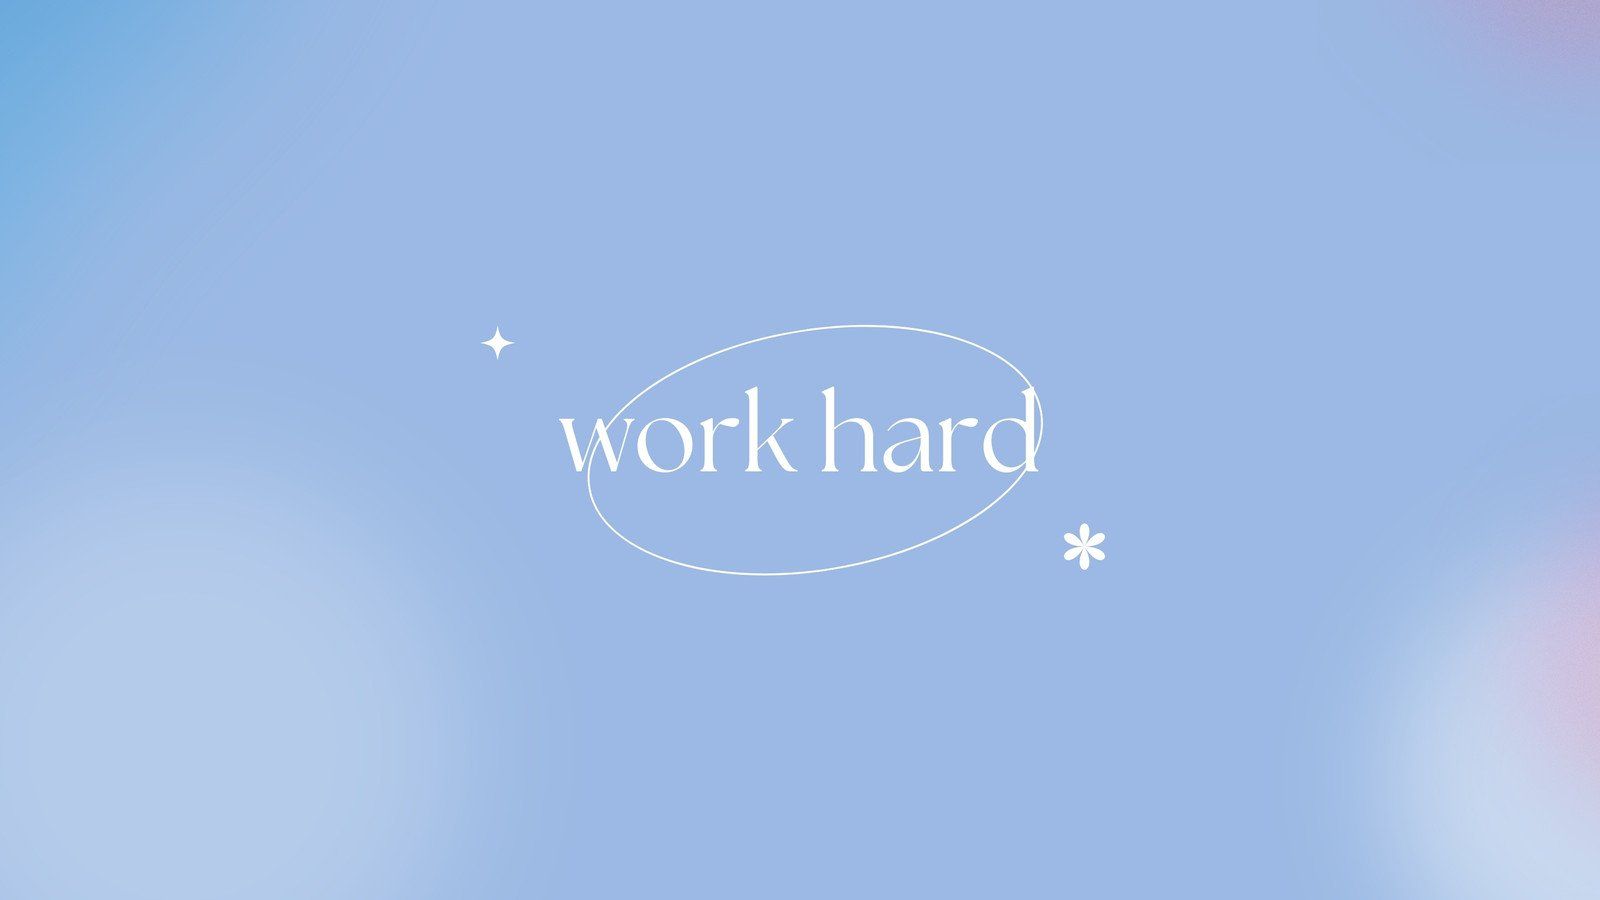 A blue background with the word work hard on it - Blue, dark blue, pastel blue, light blue